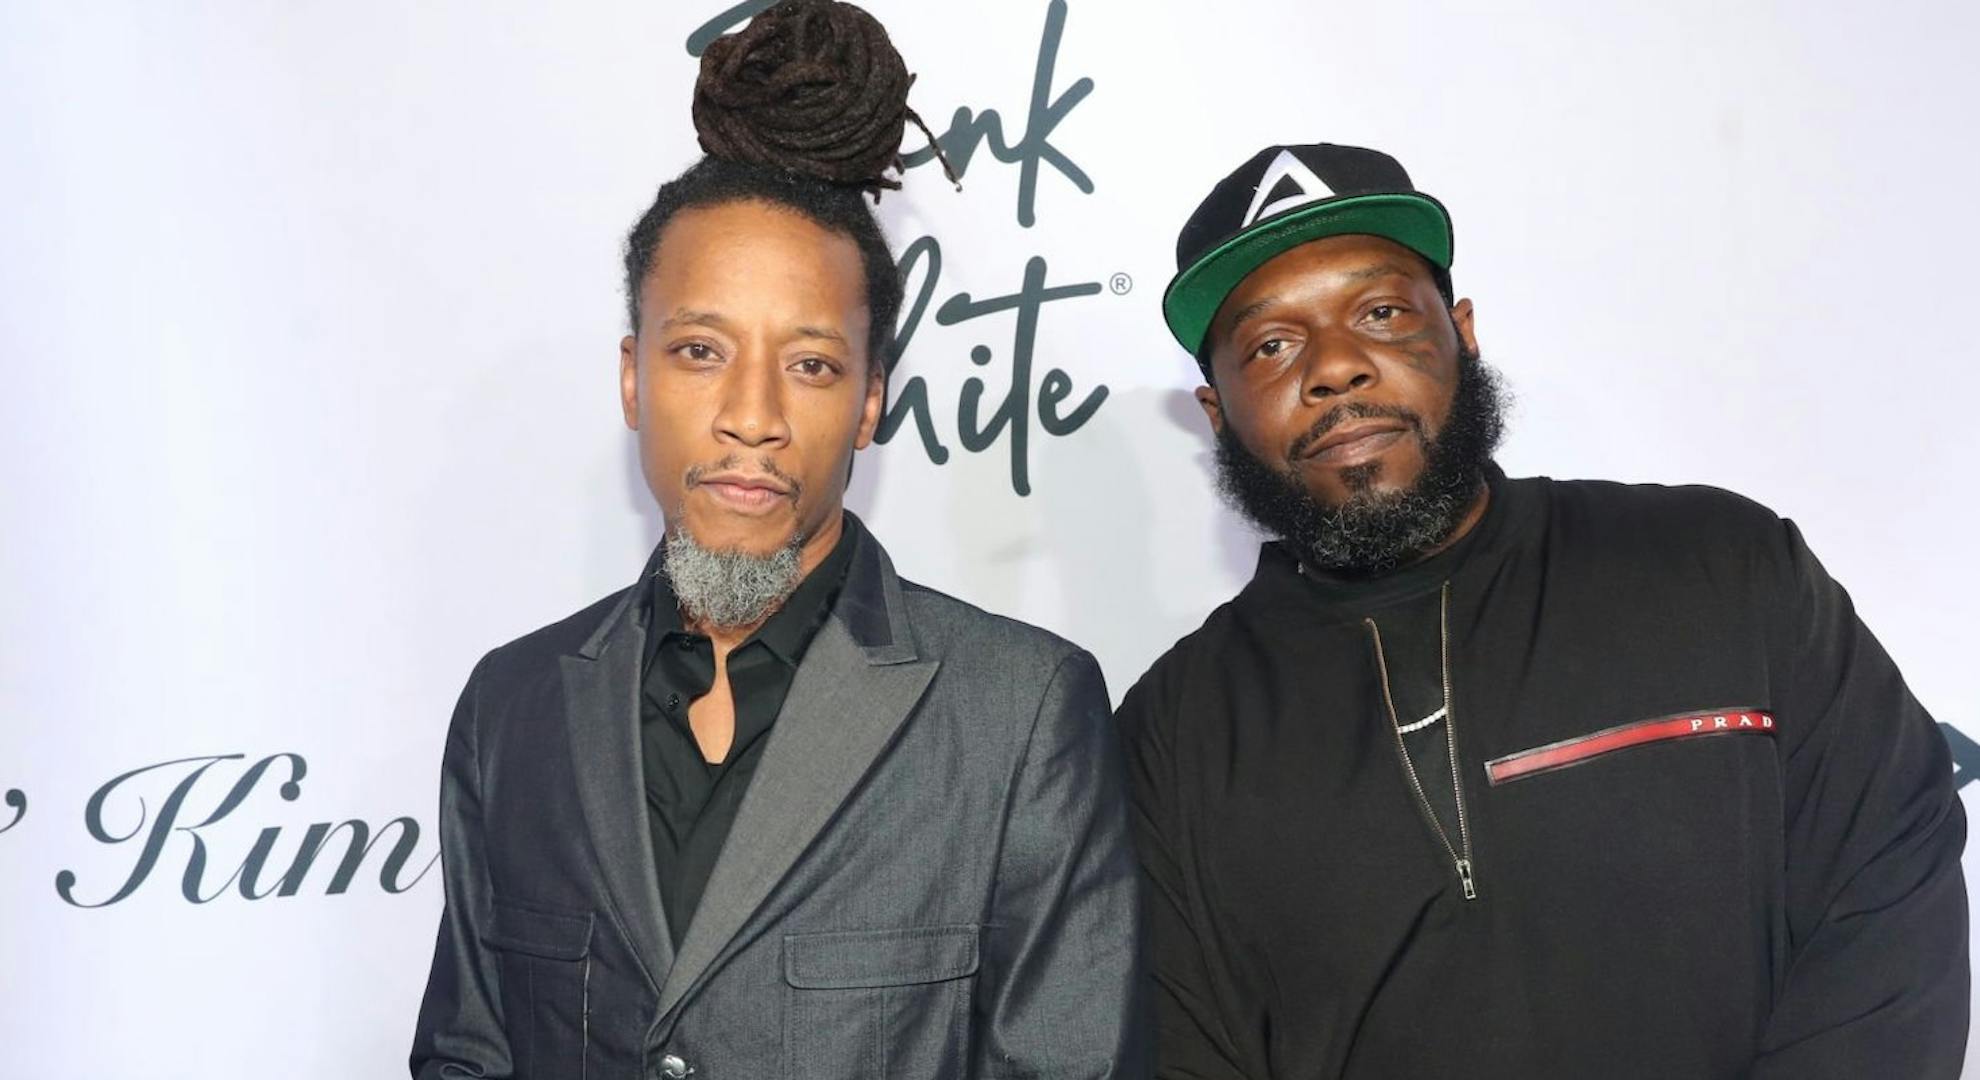 General Steele (L) and Tek of Smif-N-Wessun attend the CJ Wallace & Lexus Celebrate Hip-Hop and Honor the Life of Christopher Wallace (a.k.a The Notorious B.I.G) at the Lil' Kim Tribute Gala at Gustavino's on May 20, 2022 in New York City. (Photo by Johnny Nunez/Getty Images for Lexus)